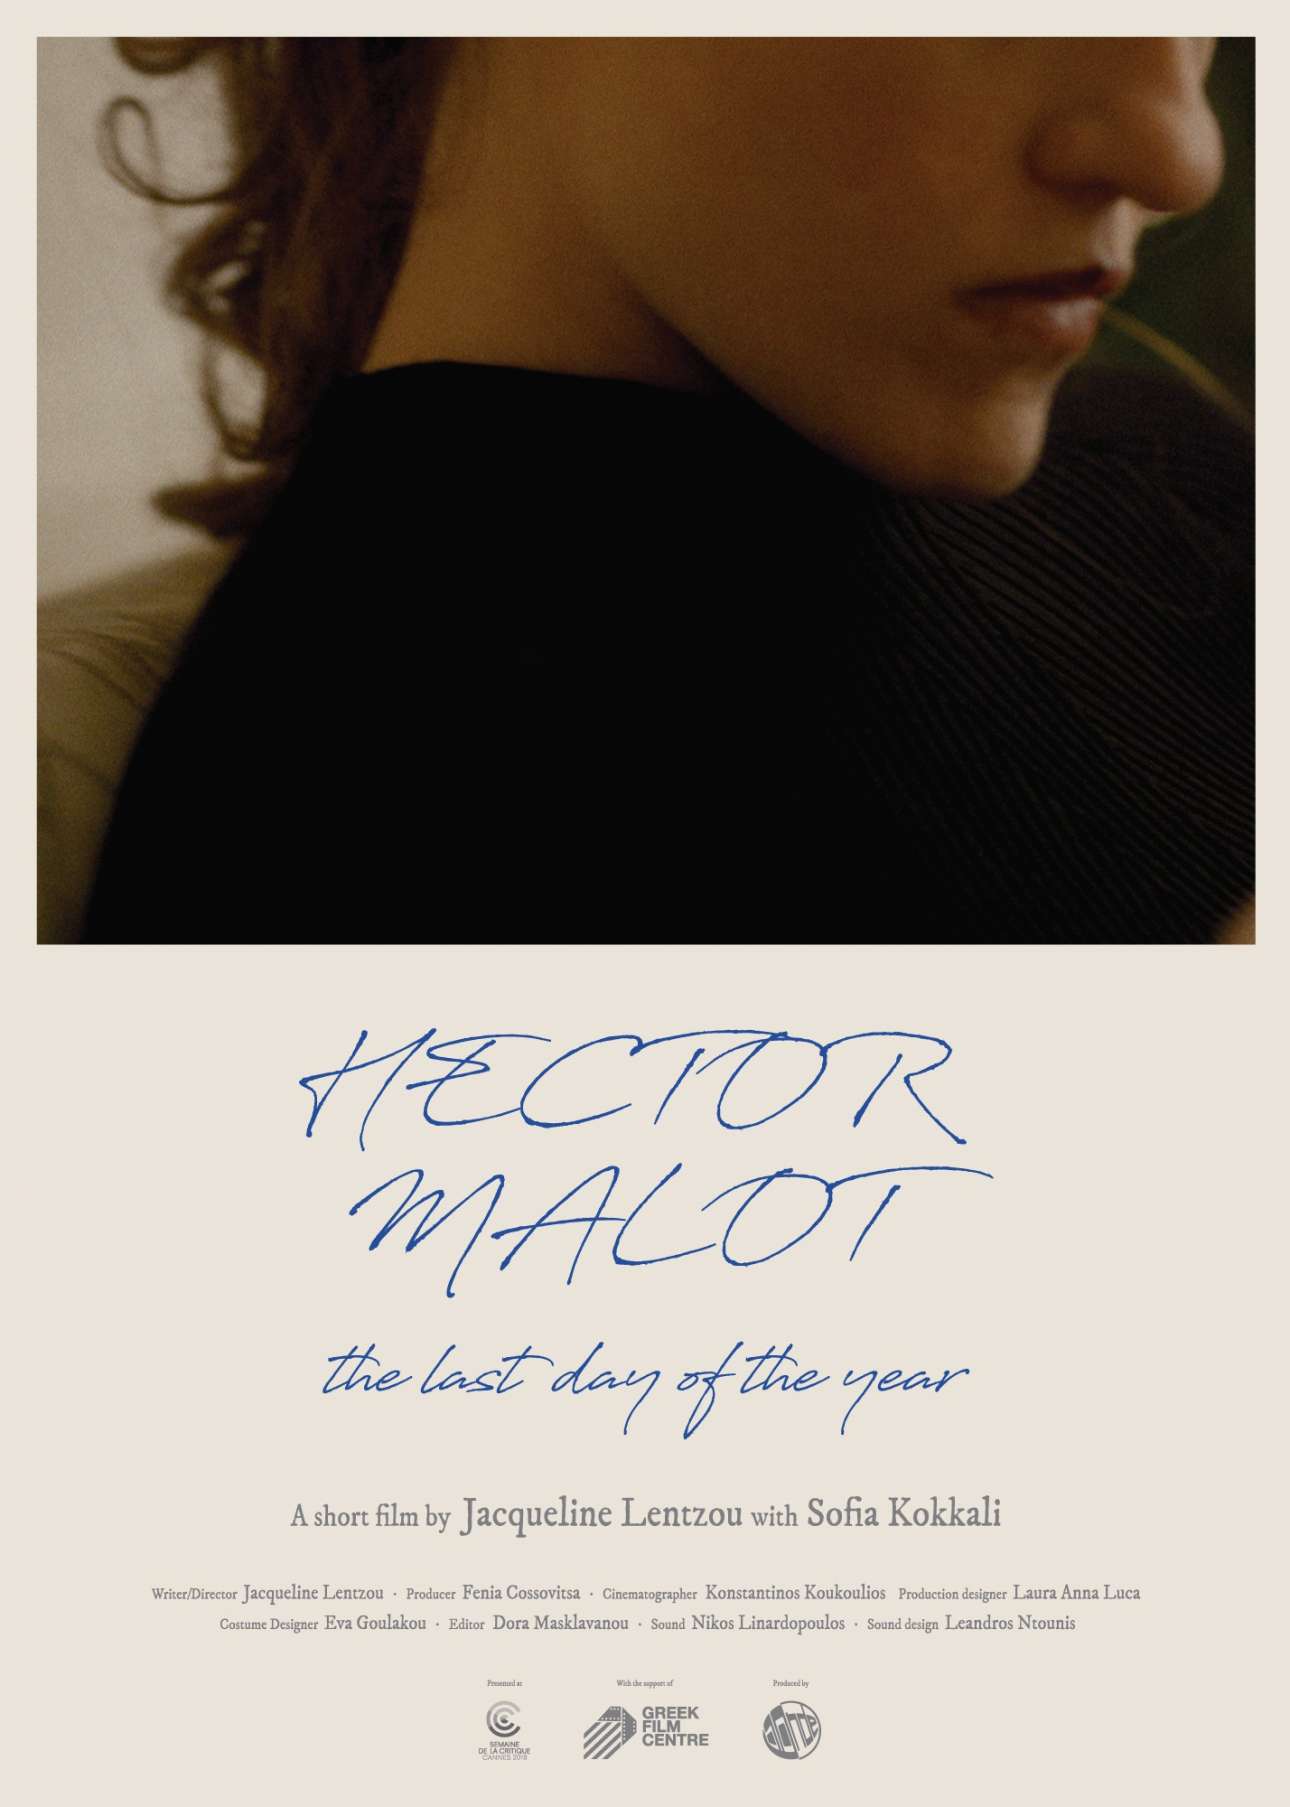 HECTOR-MALOT-THE LAST DAY OF THE YEAR